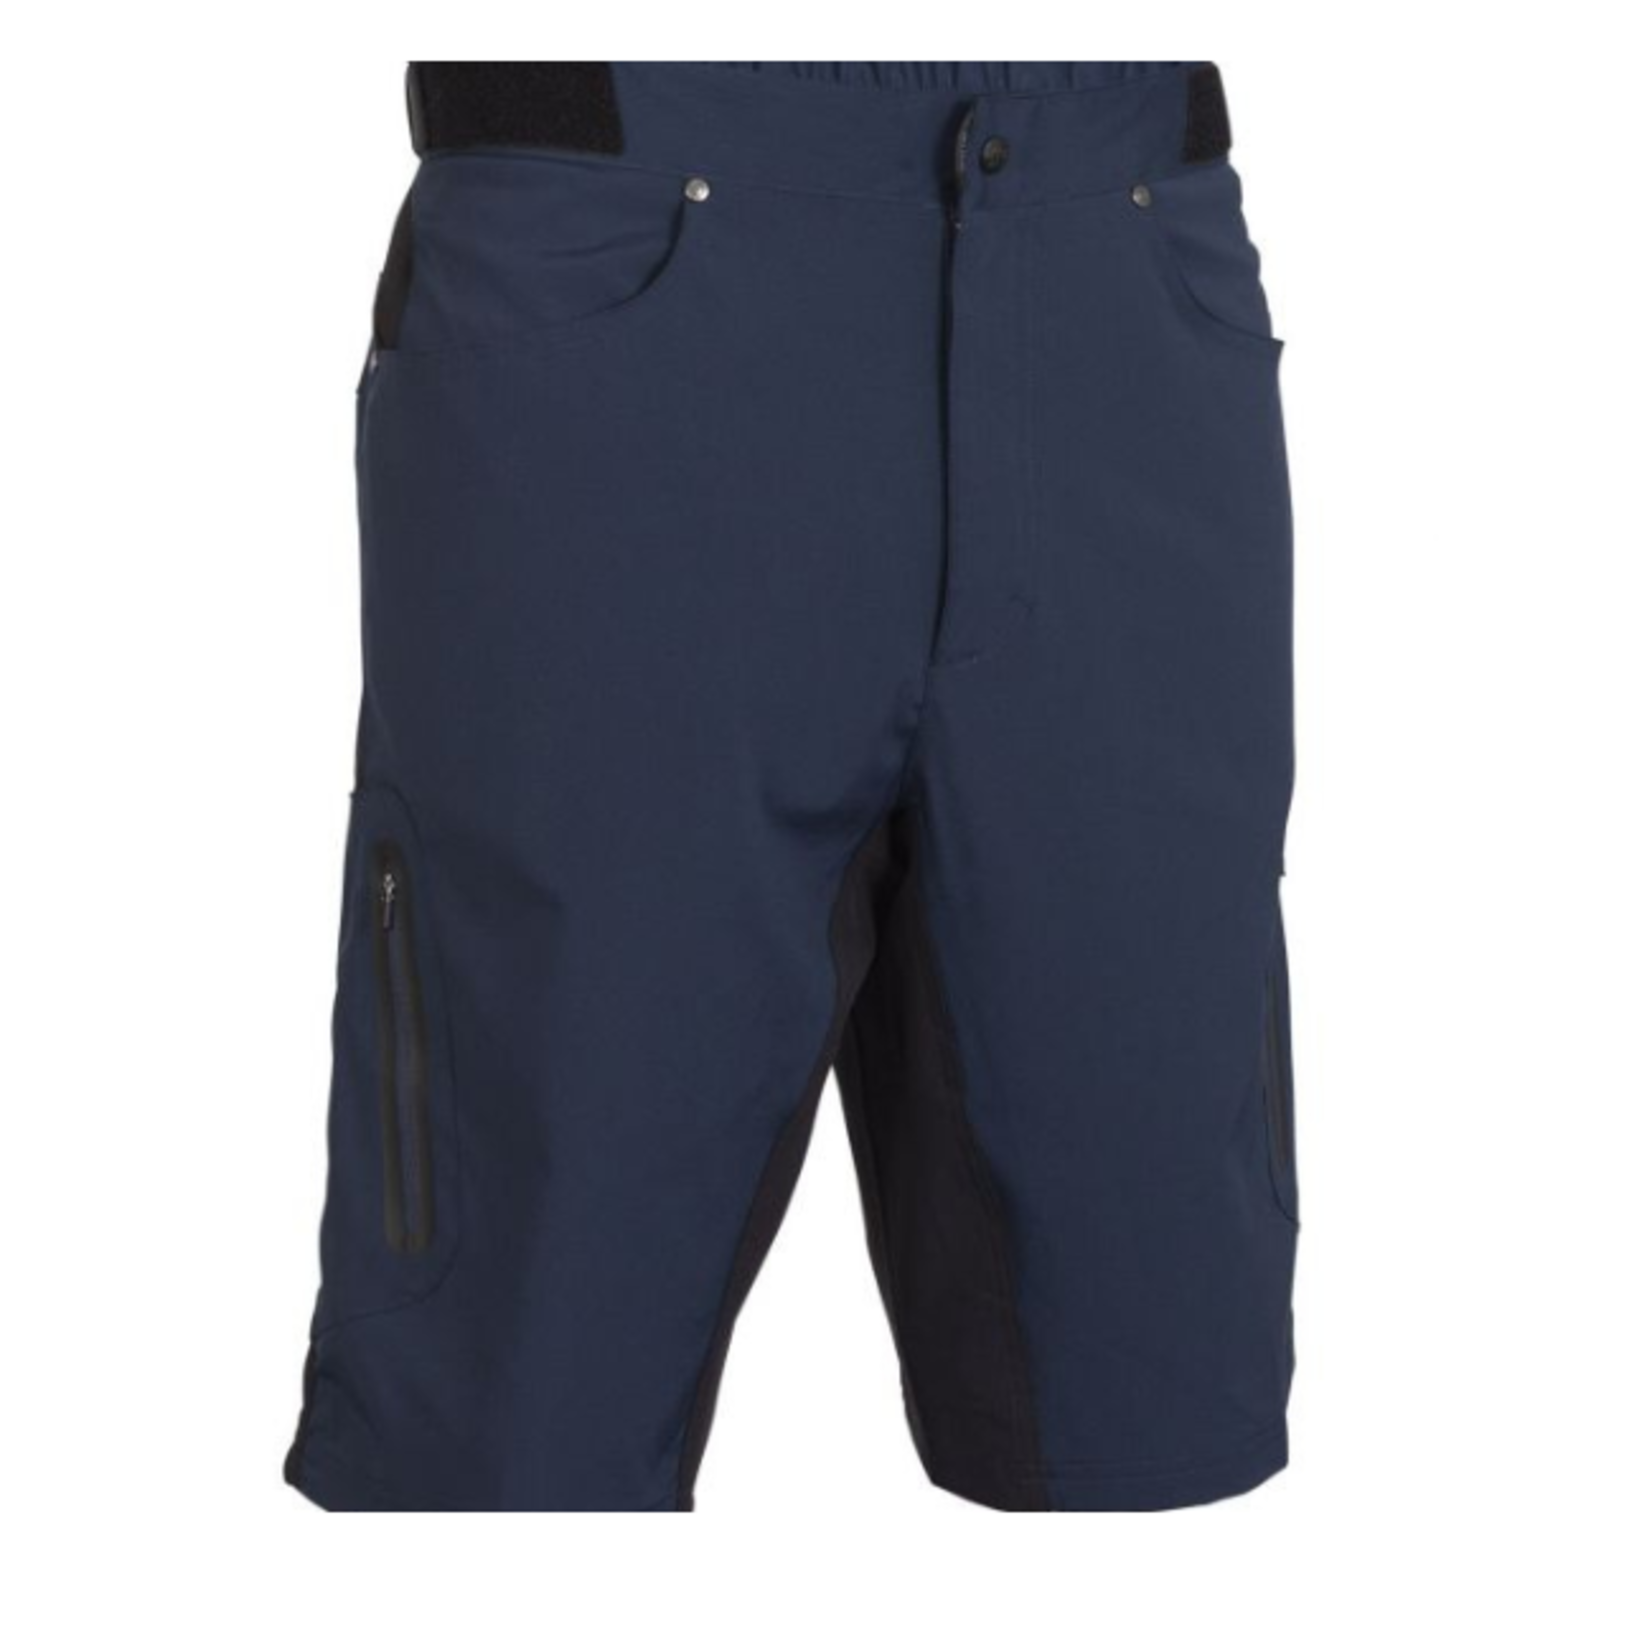 Zoic Zoic  Ether Shorts - Youth (tweens)